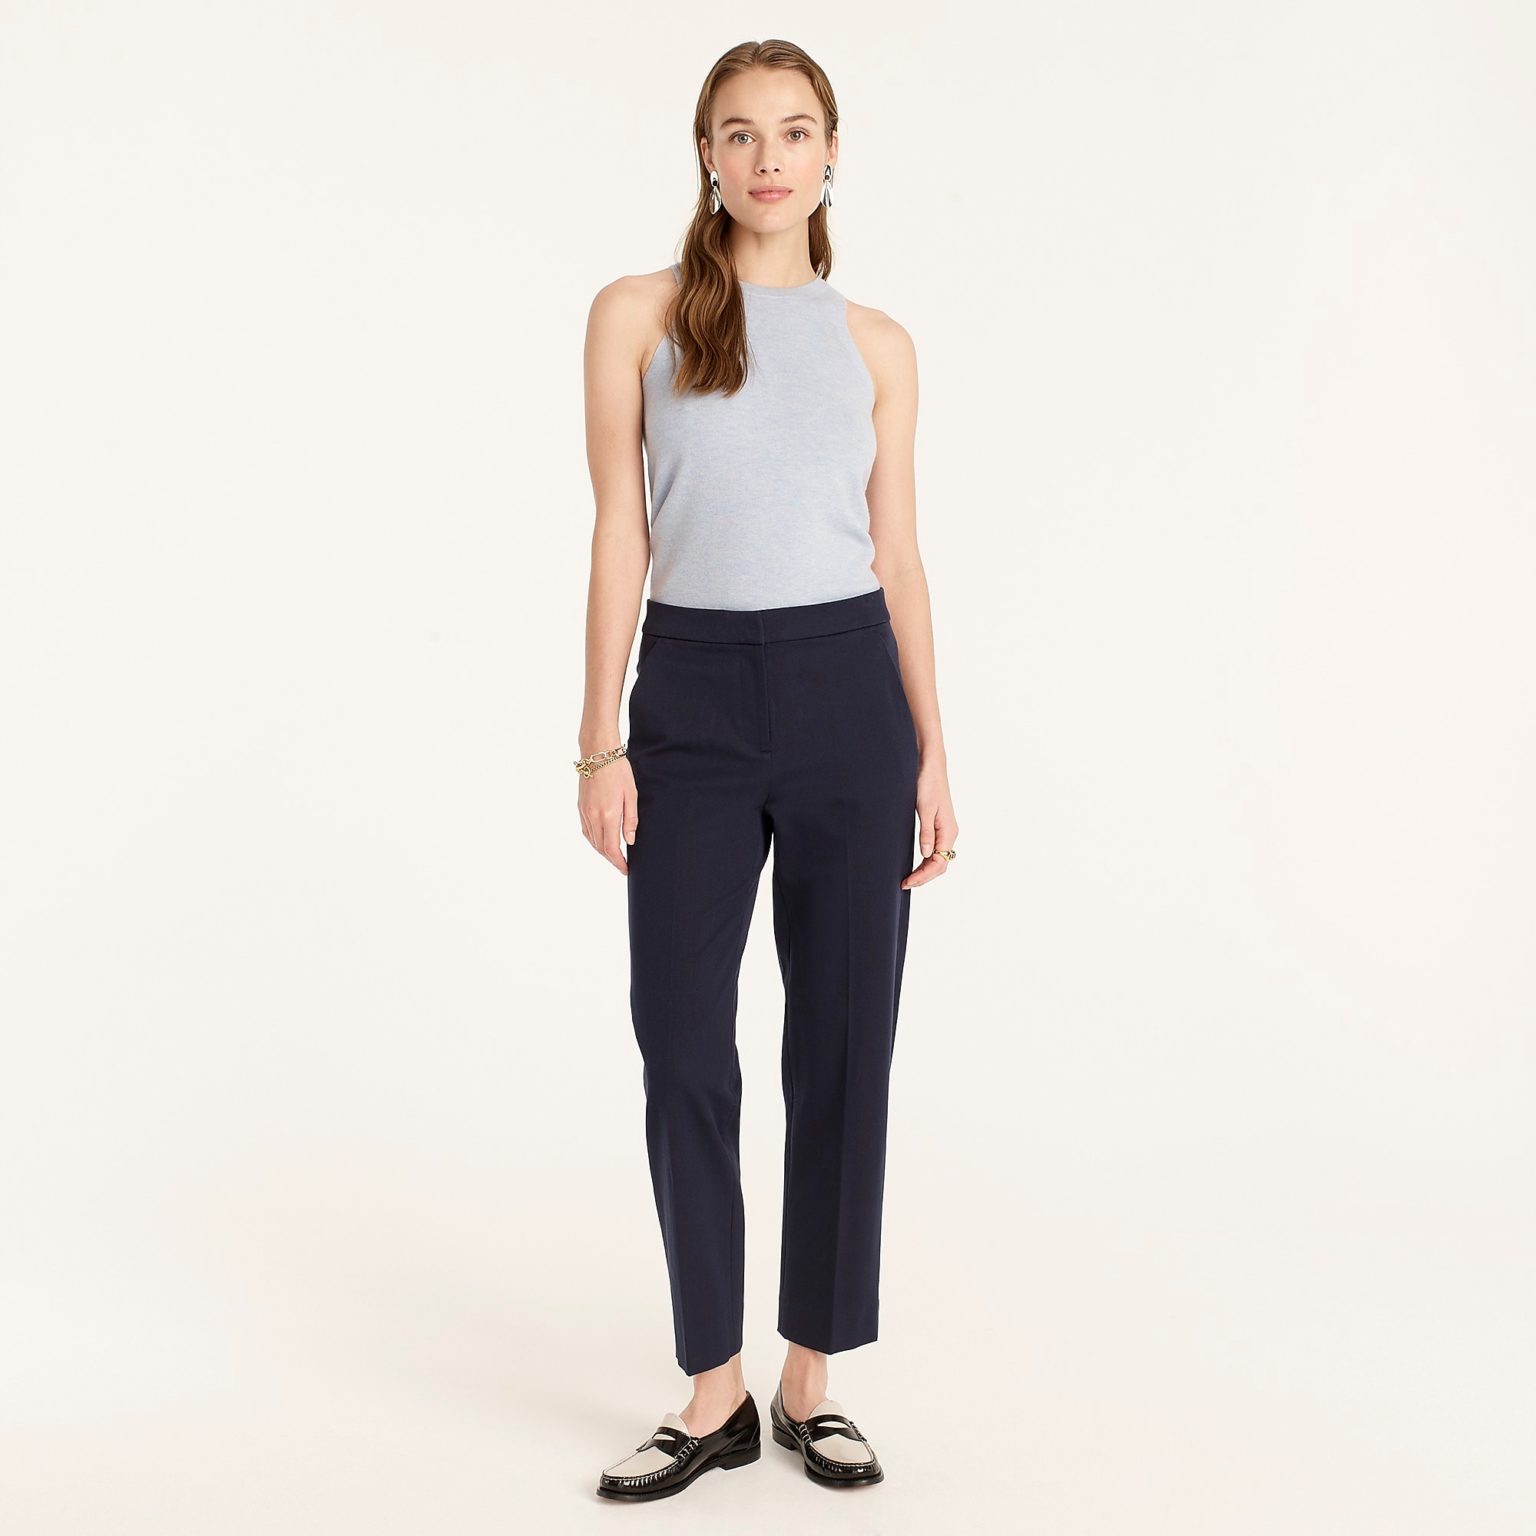 Jcrew Review - Must Read This Before Buying